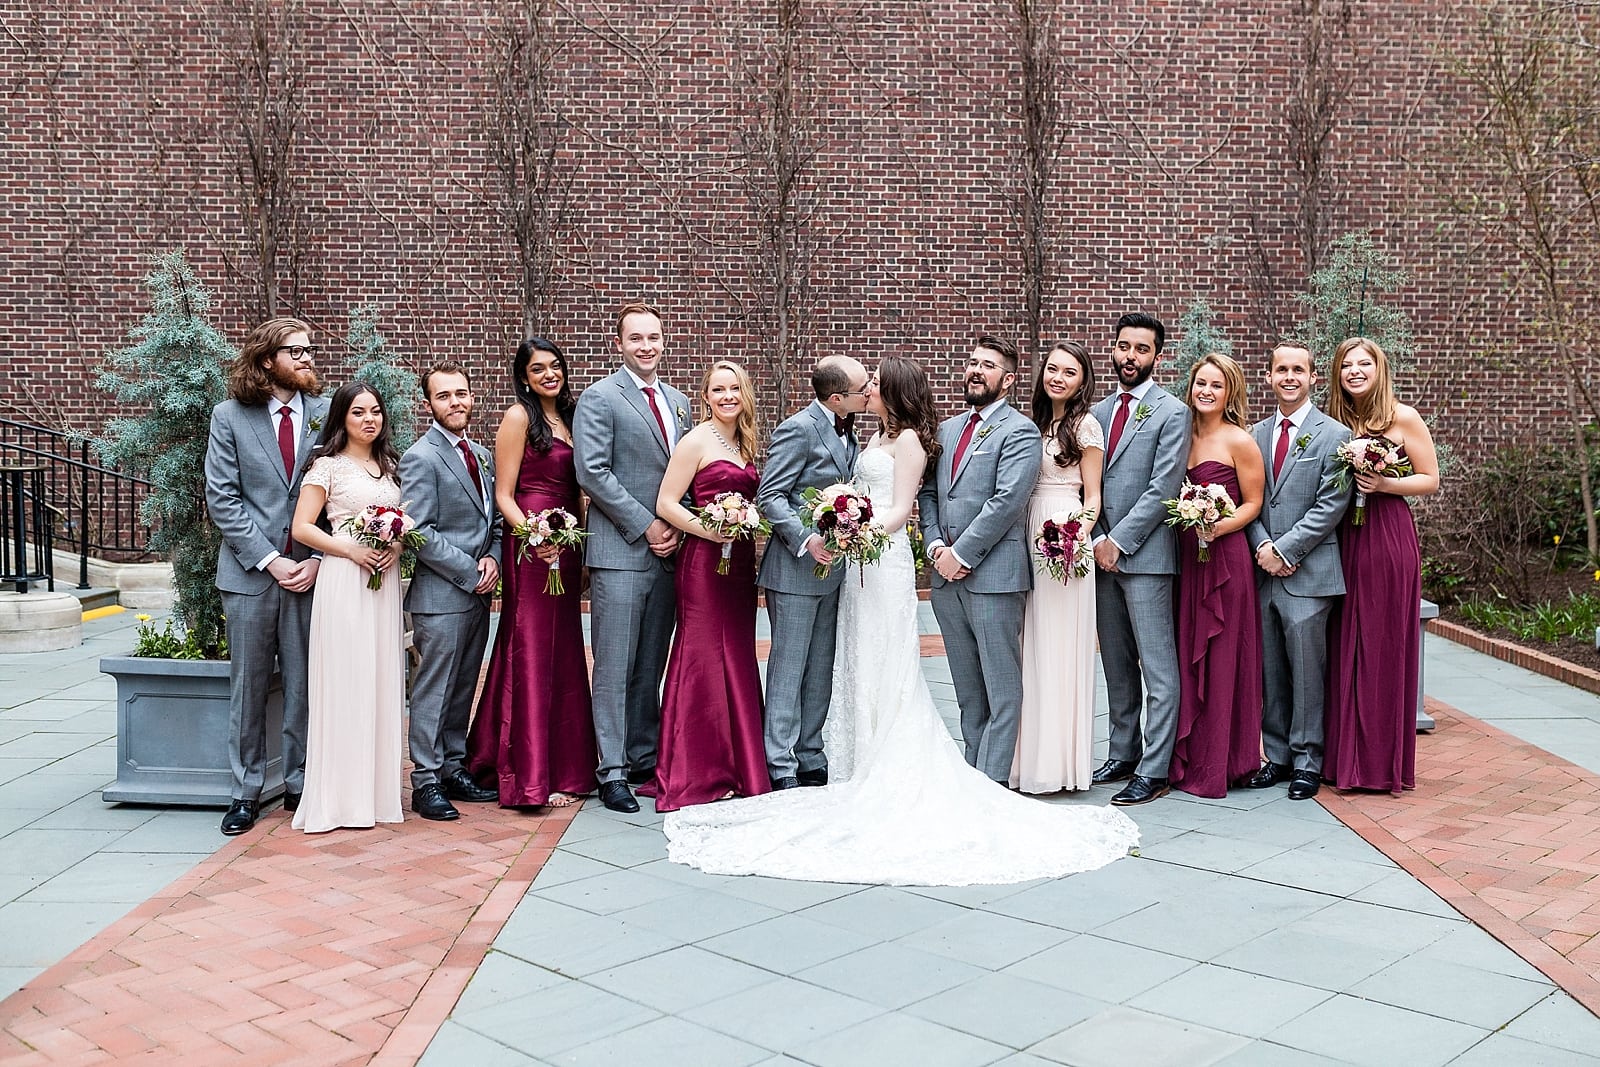 Groomsmen and Bridal Party portrait with bride and groom kissing